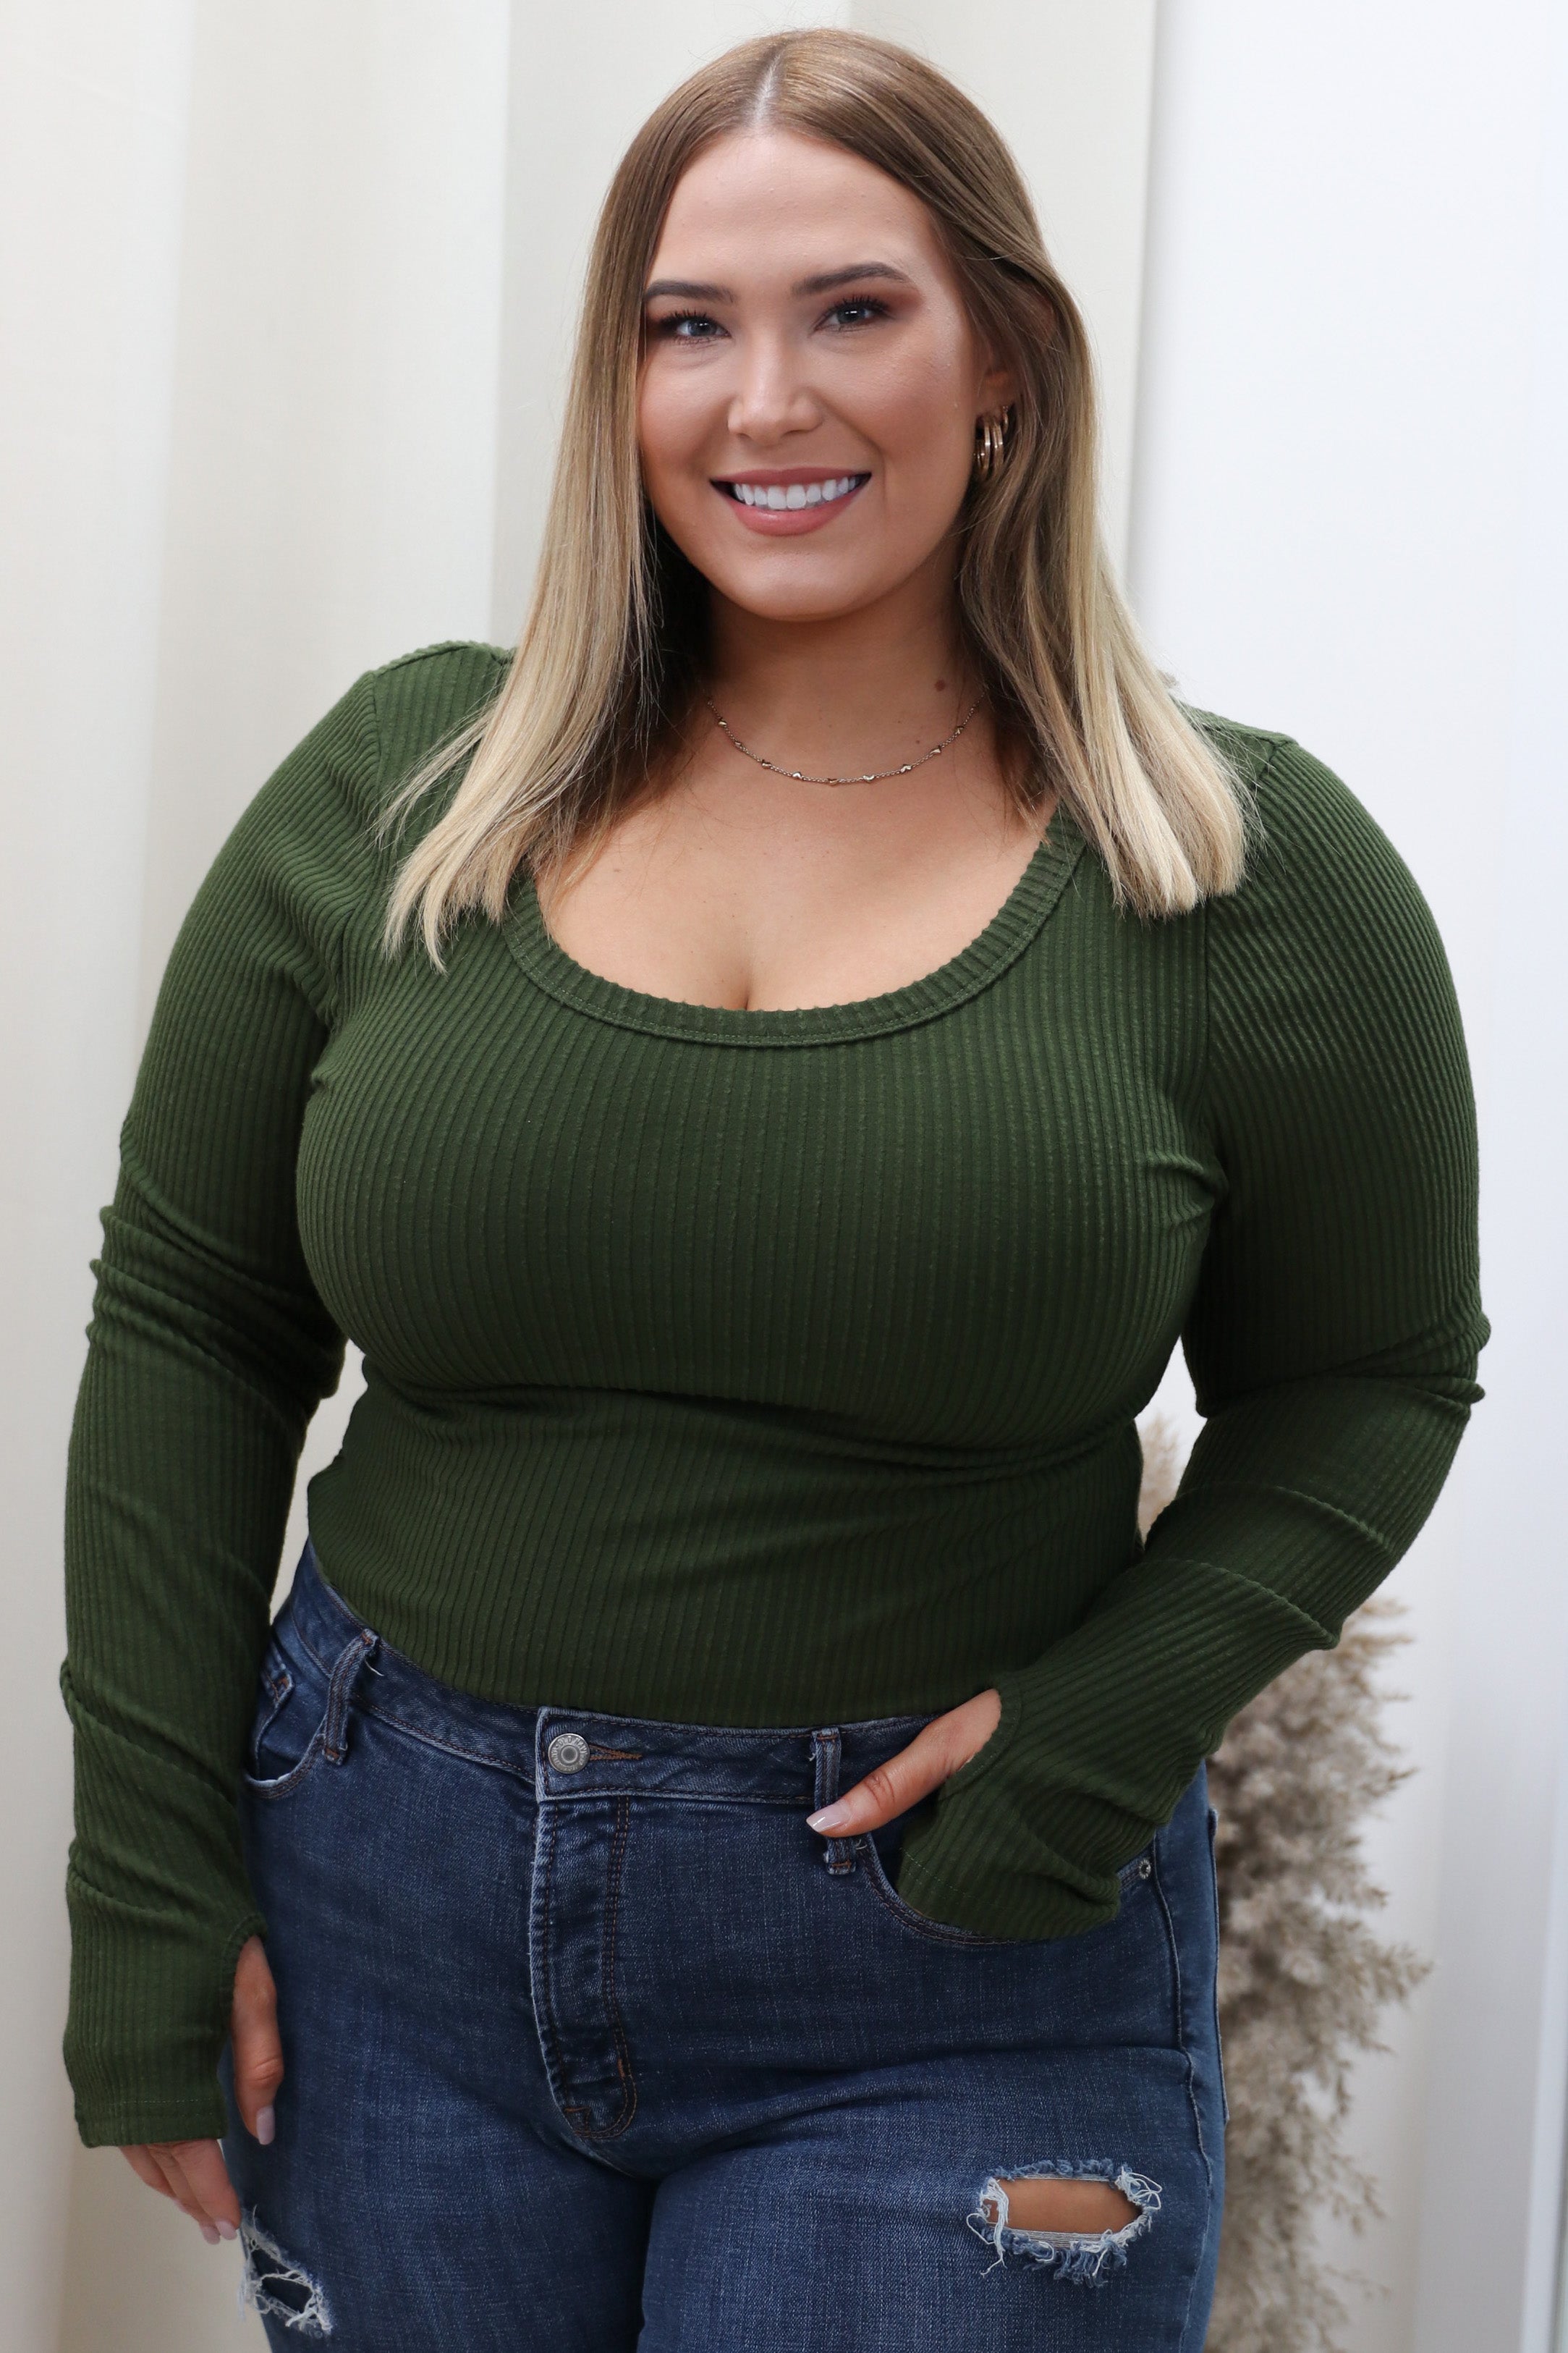 blayne bergeron recommends Curvy Girl Pic